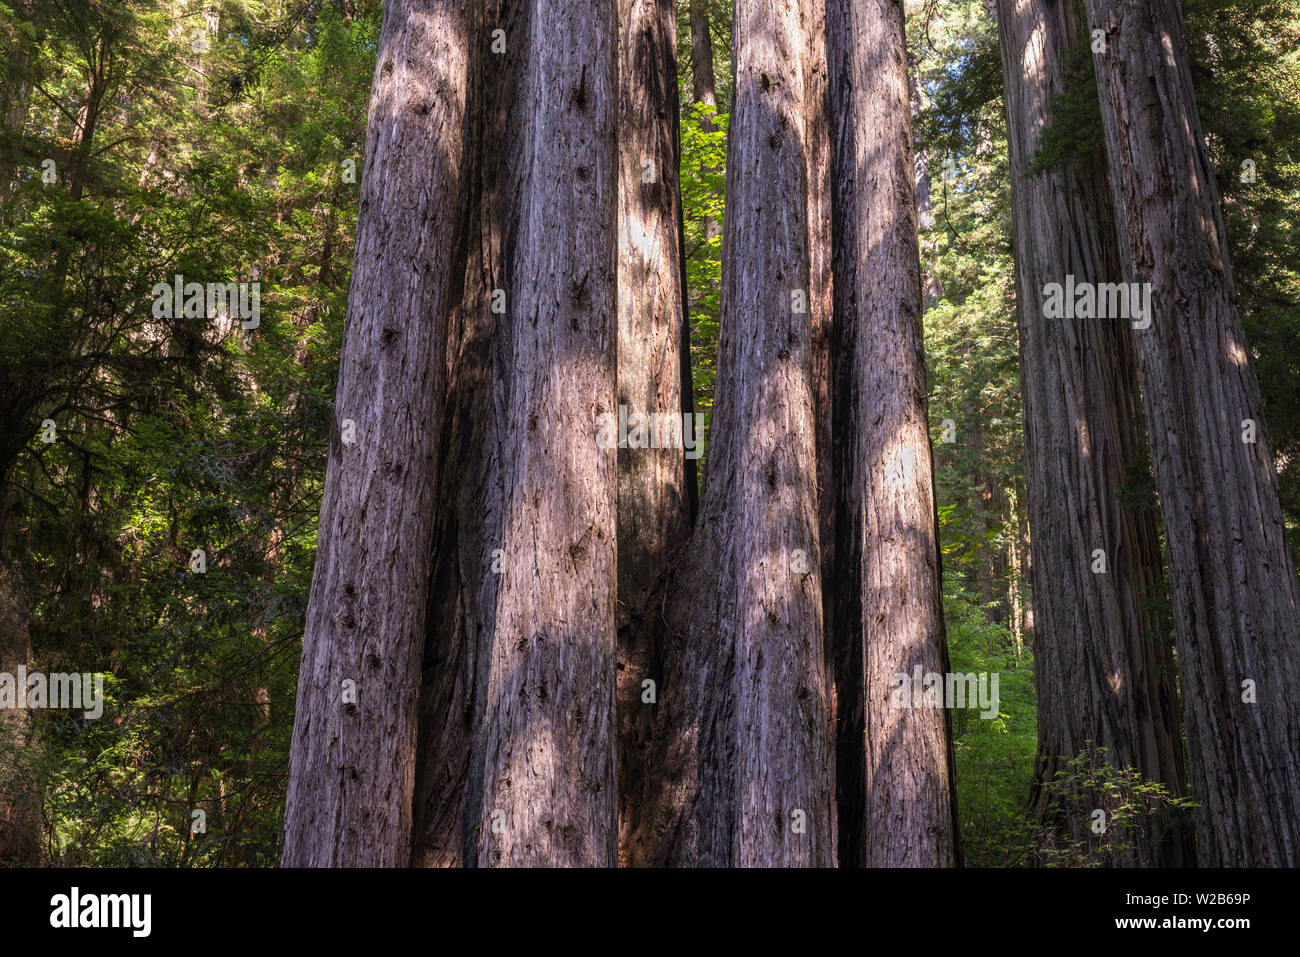 Pine tree forest in Northern California, USA. Stock Photo